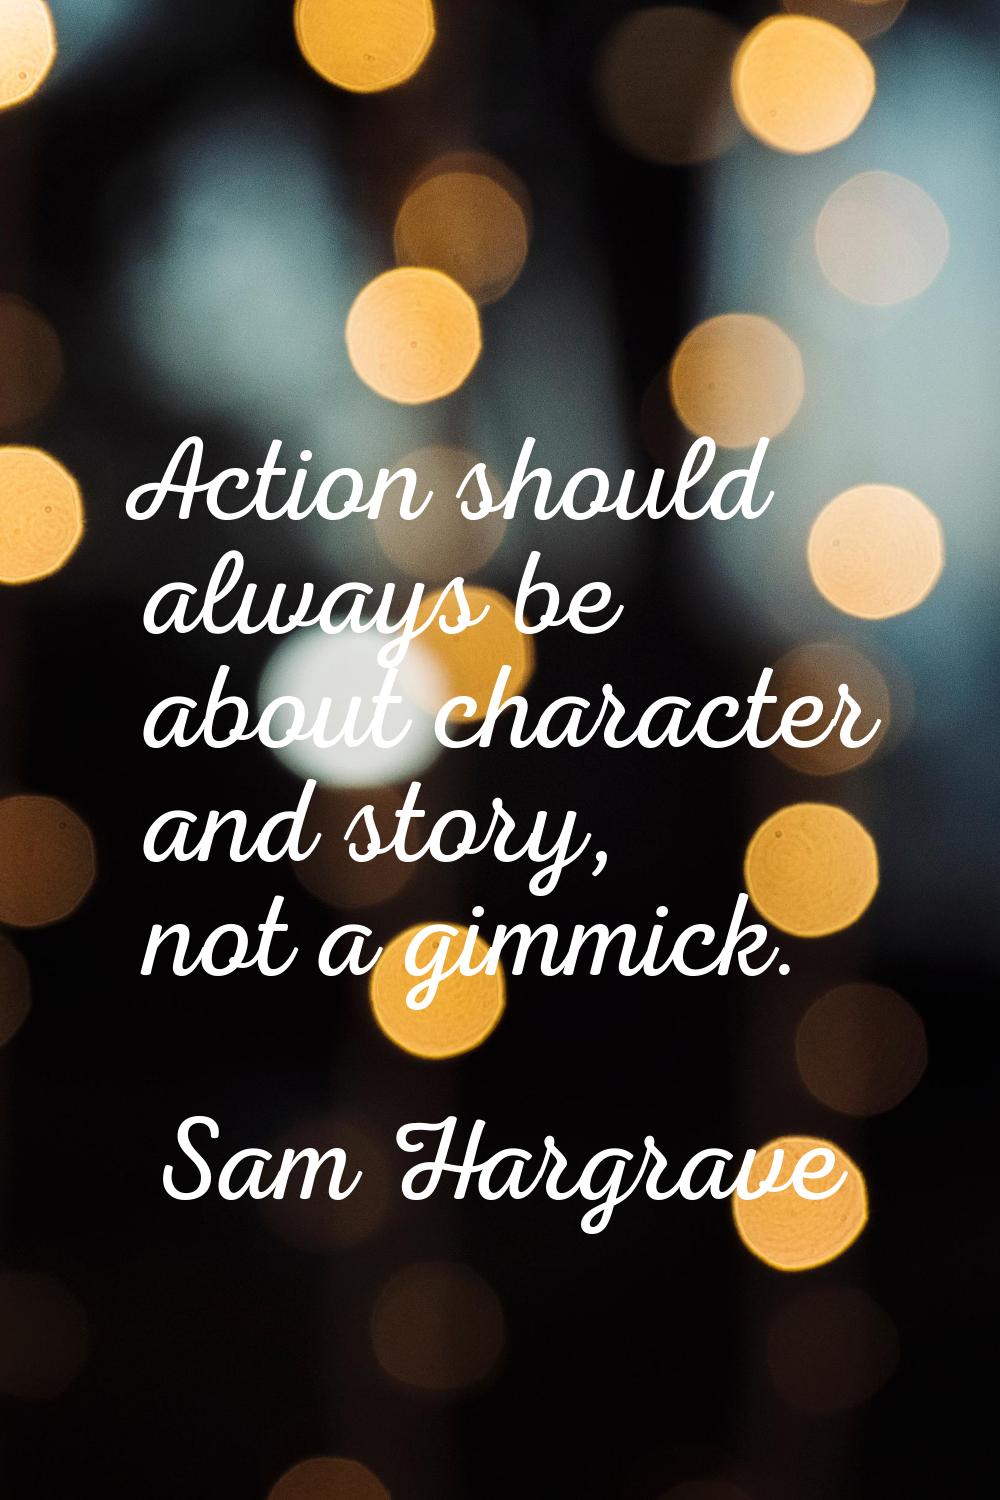 Action should always be about character and story, not a gimmick.